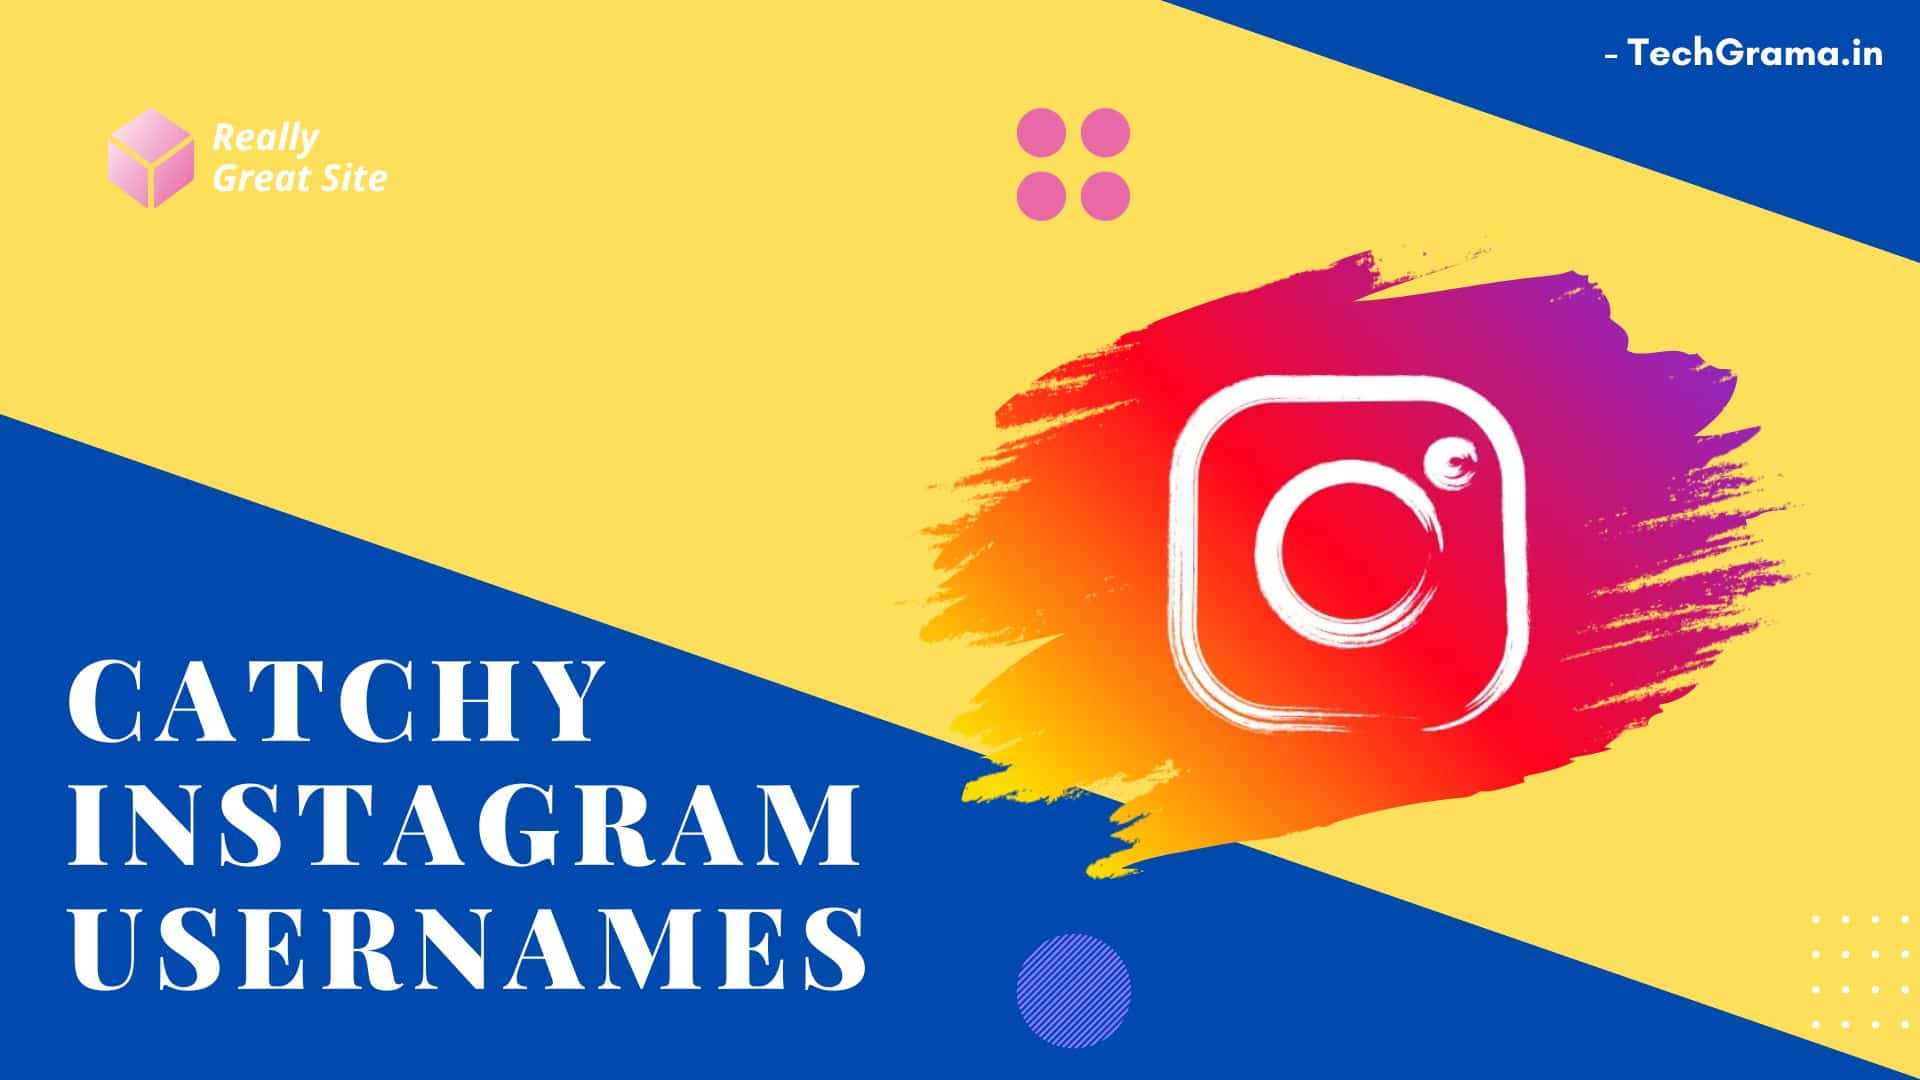 Best Catchy Names For Instagram, Catchy Names For Instagram Business, Catchy Names For Instagram For Girls & Boys, Most Catchy Instagram Names, Catchy Names For Instagram Page, Catchy Instagram Usernames, and Perfect Catchy Names.